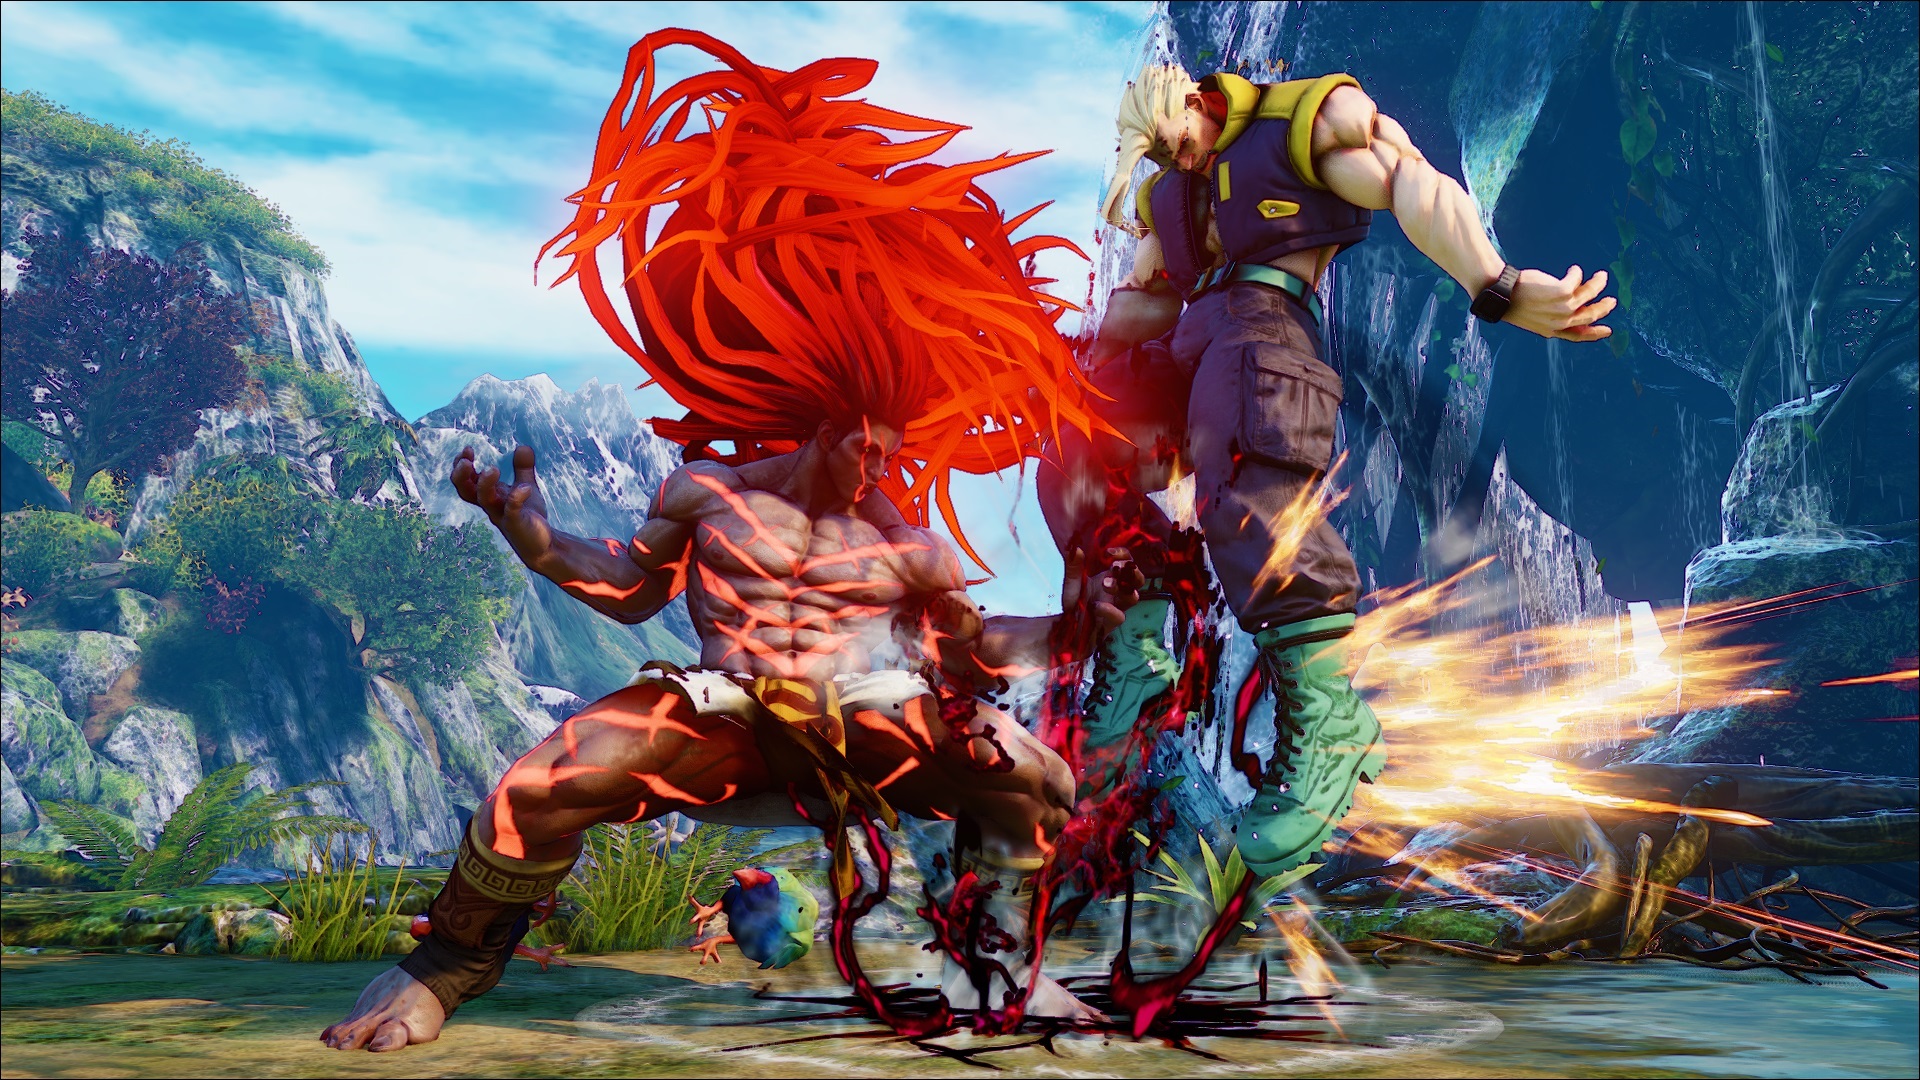 Street Fighter 5: Arcade Edition announced for PS4 and PC